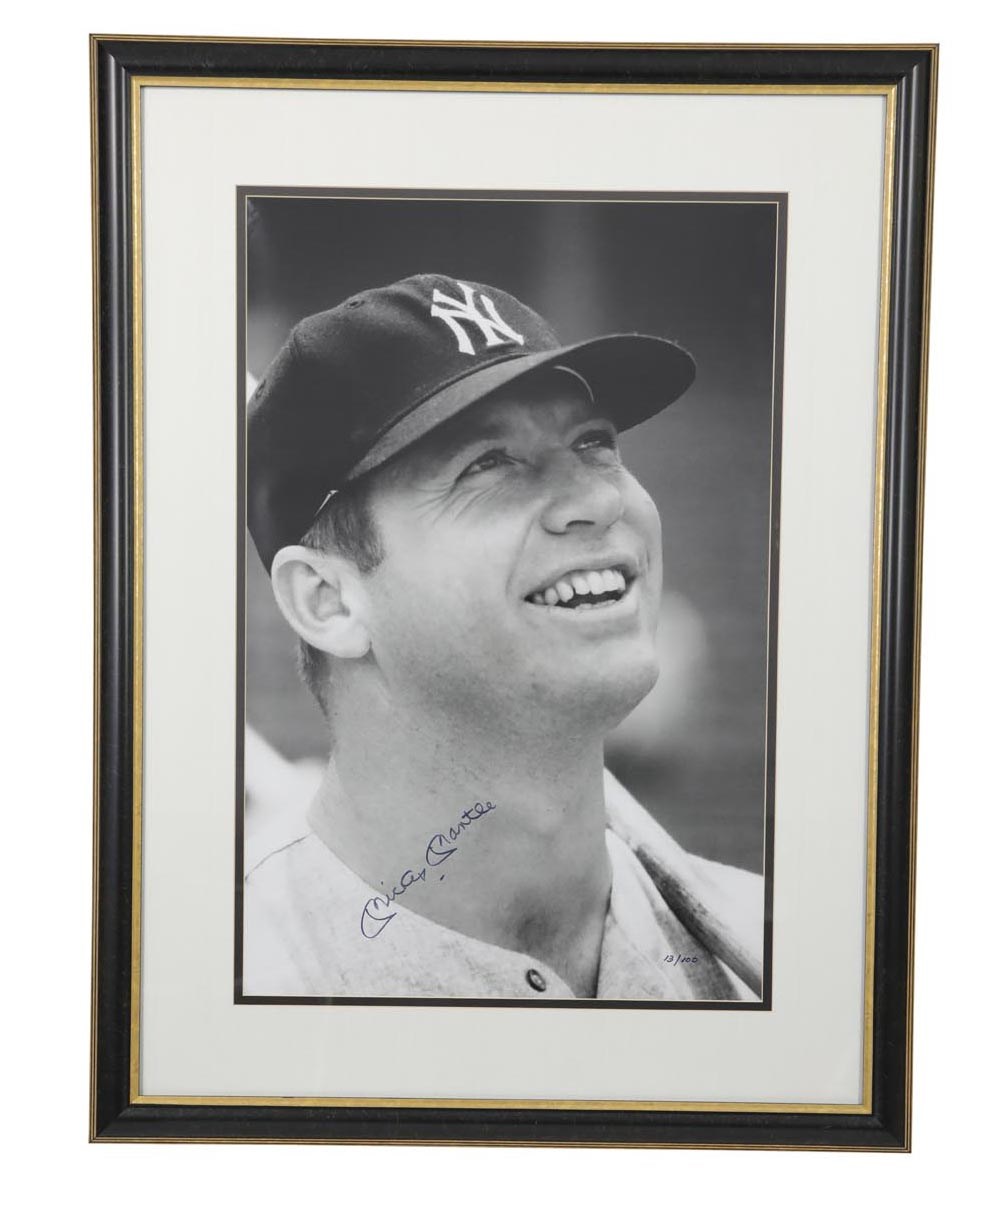 Mantle and Maris - Gigantic Mickey Mantle Signed Photograph (Pro Sports Services)